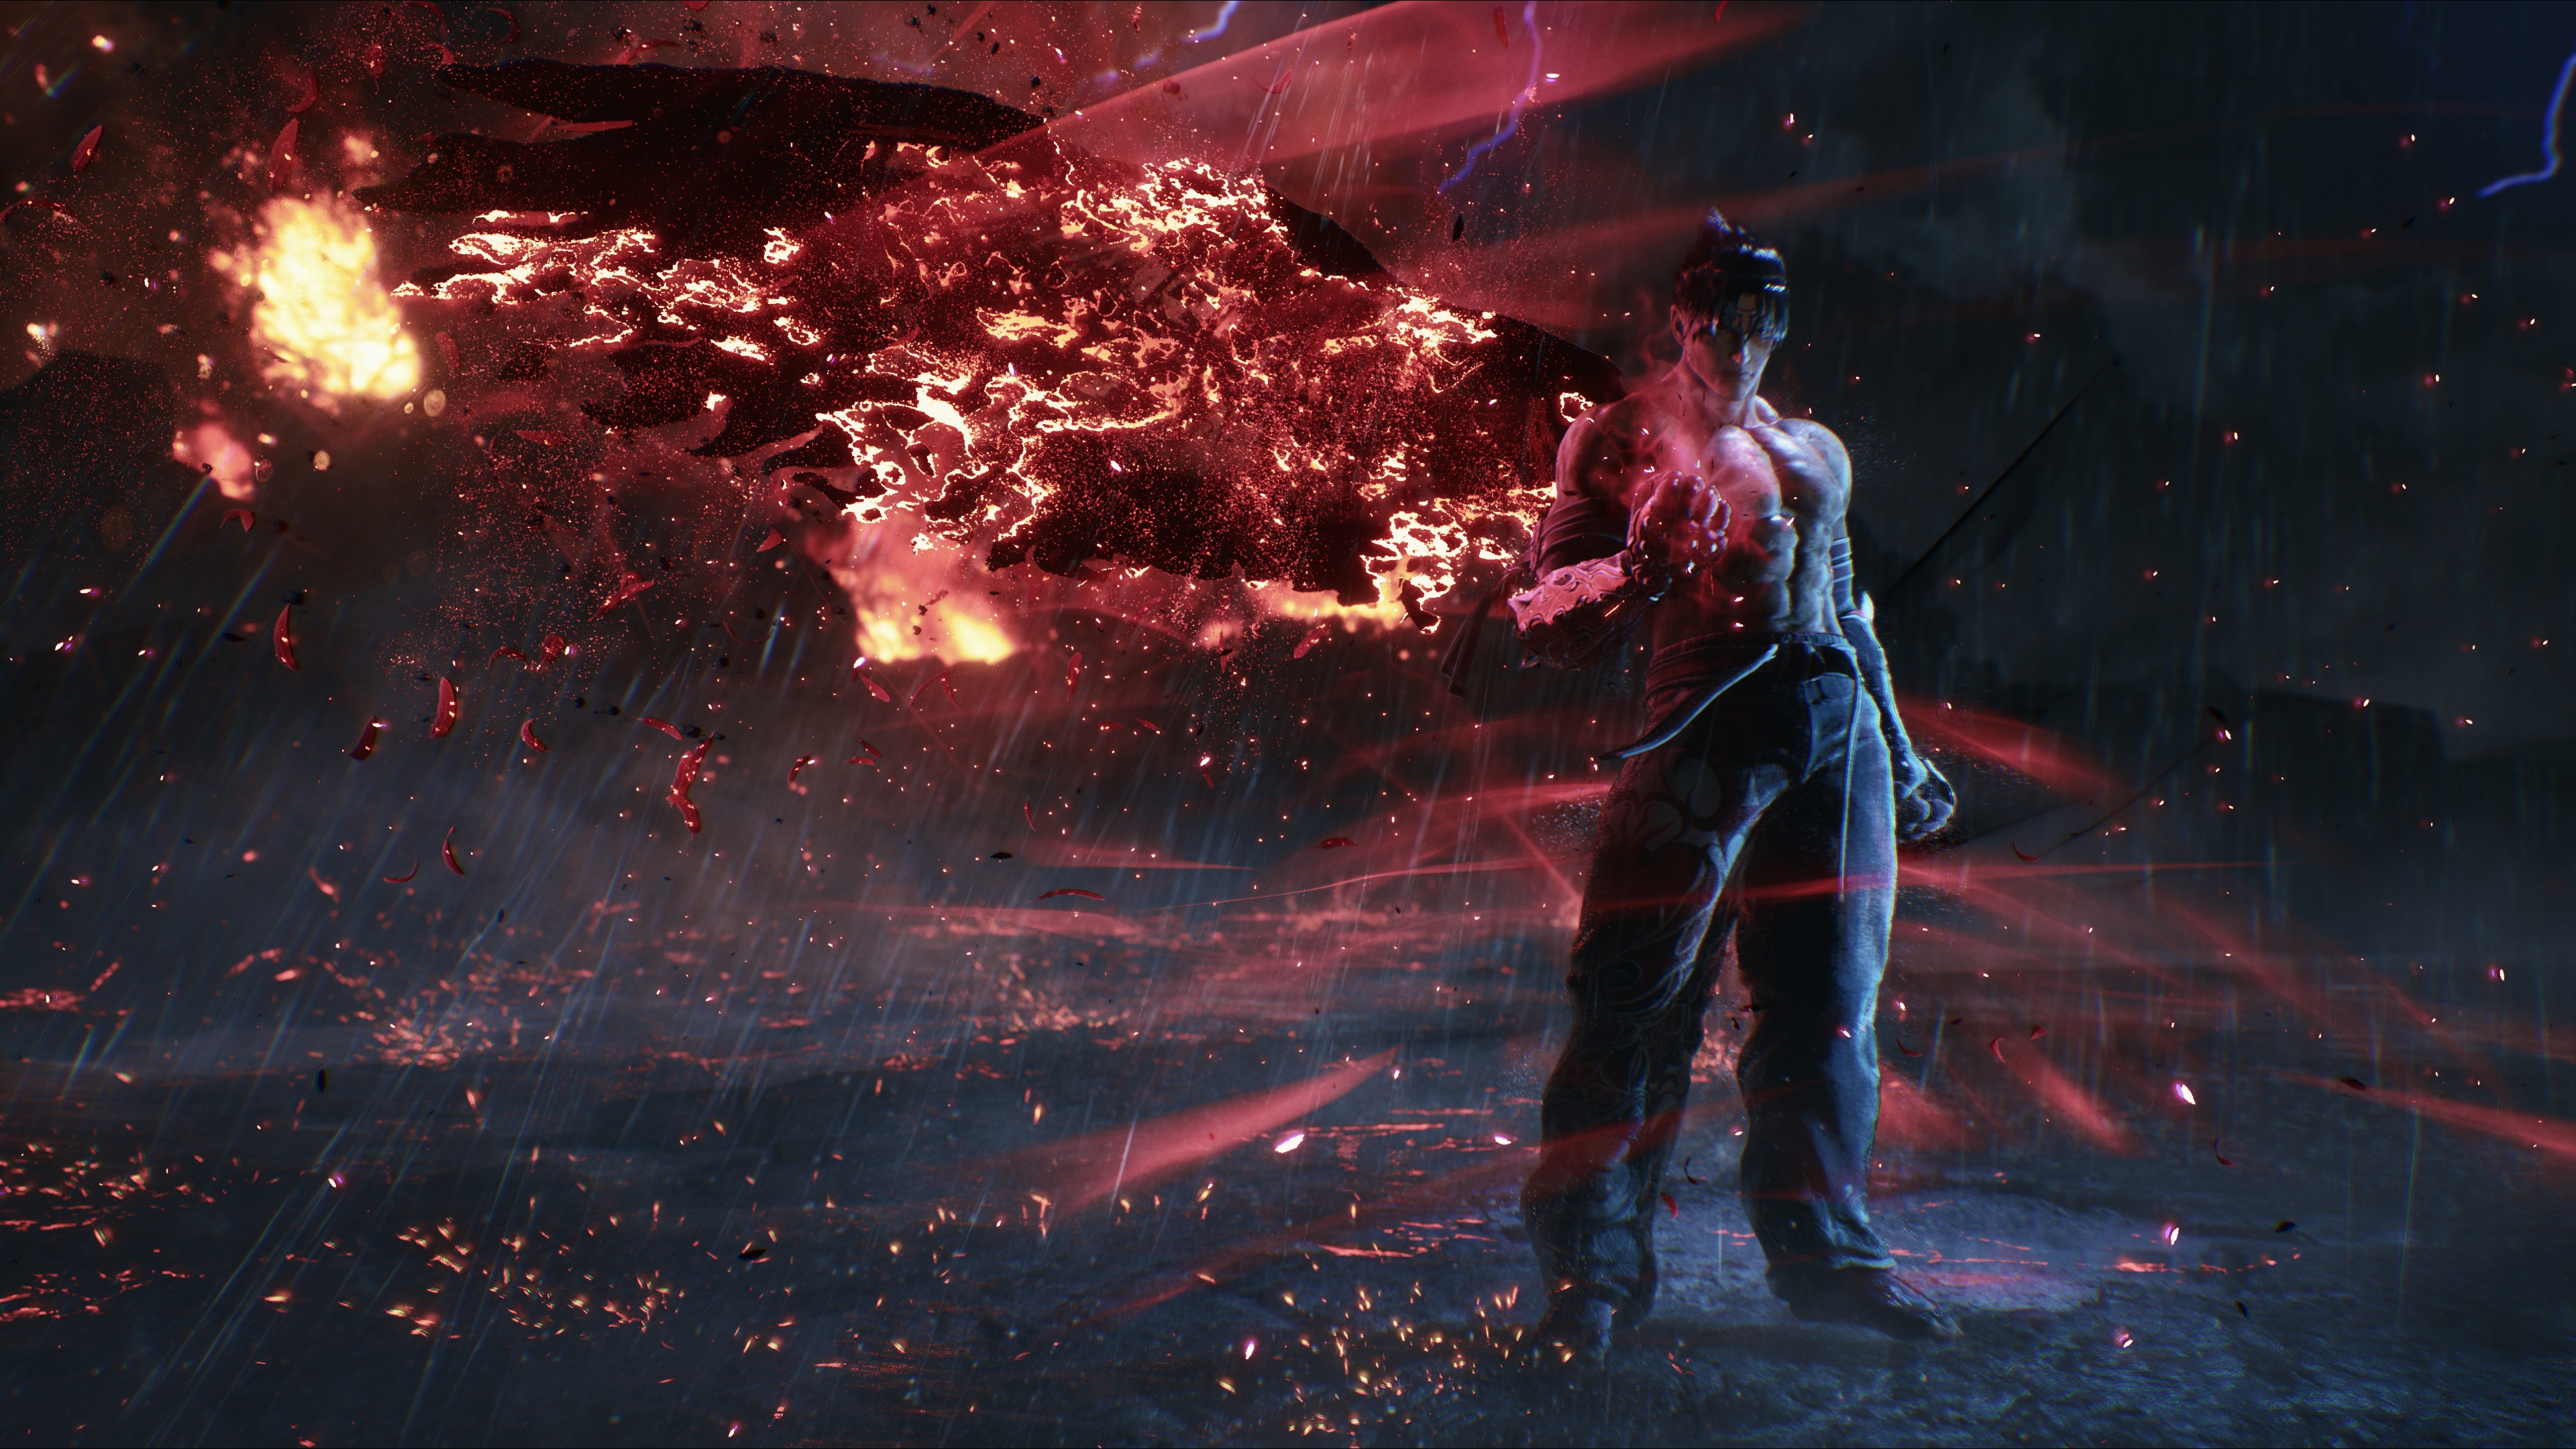 Tekken 8 reportedly was briefly installable on the Xbox Series X